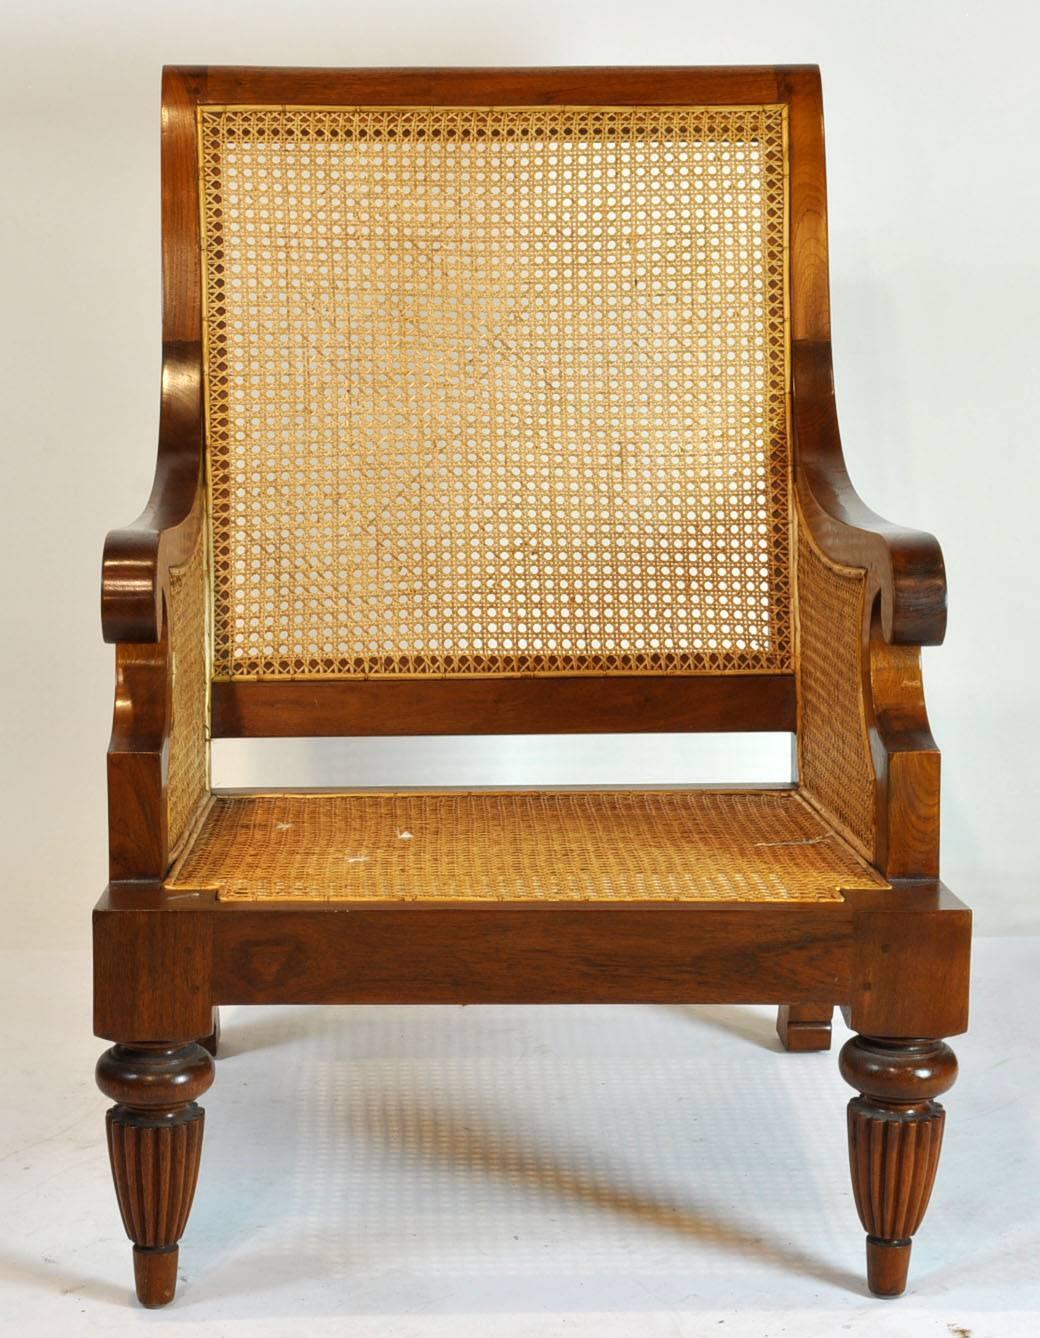 English British Colonial Imports Caned Leather Plantation Style Lounge Chair and Ottoman